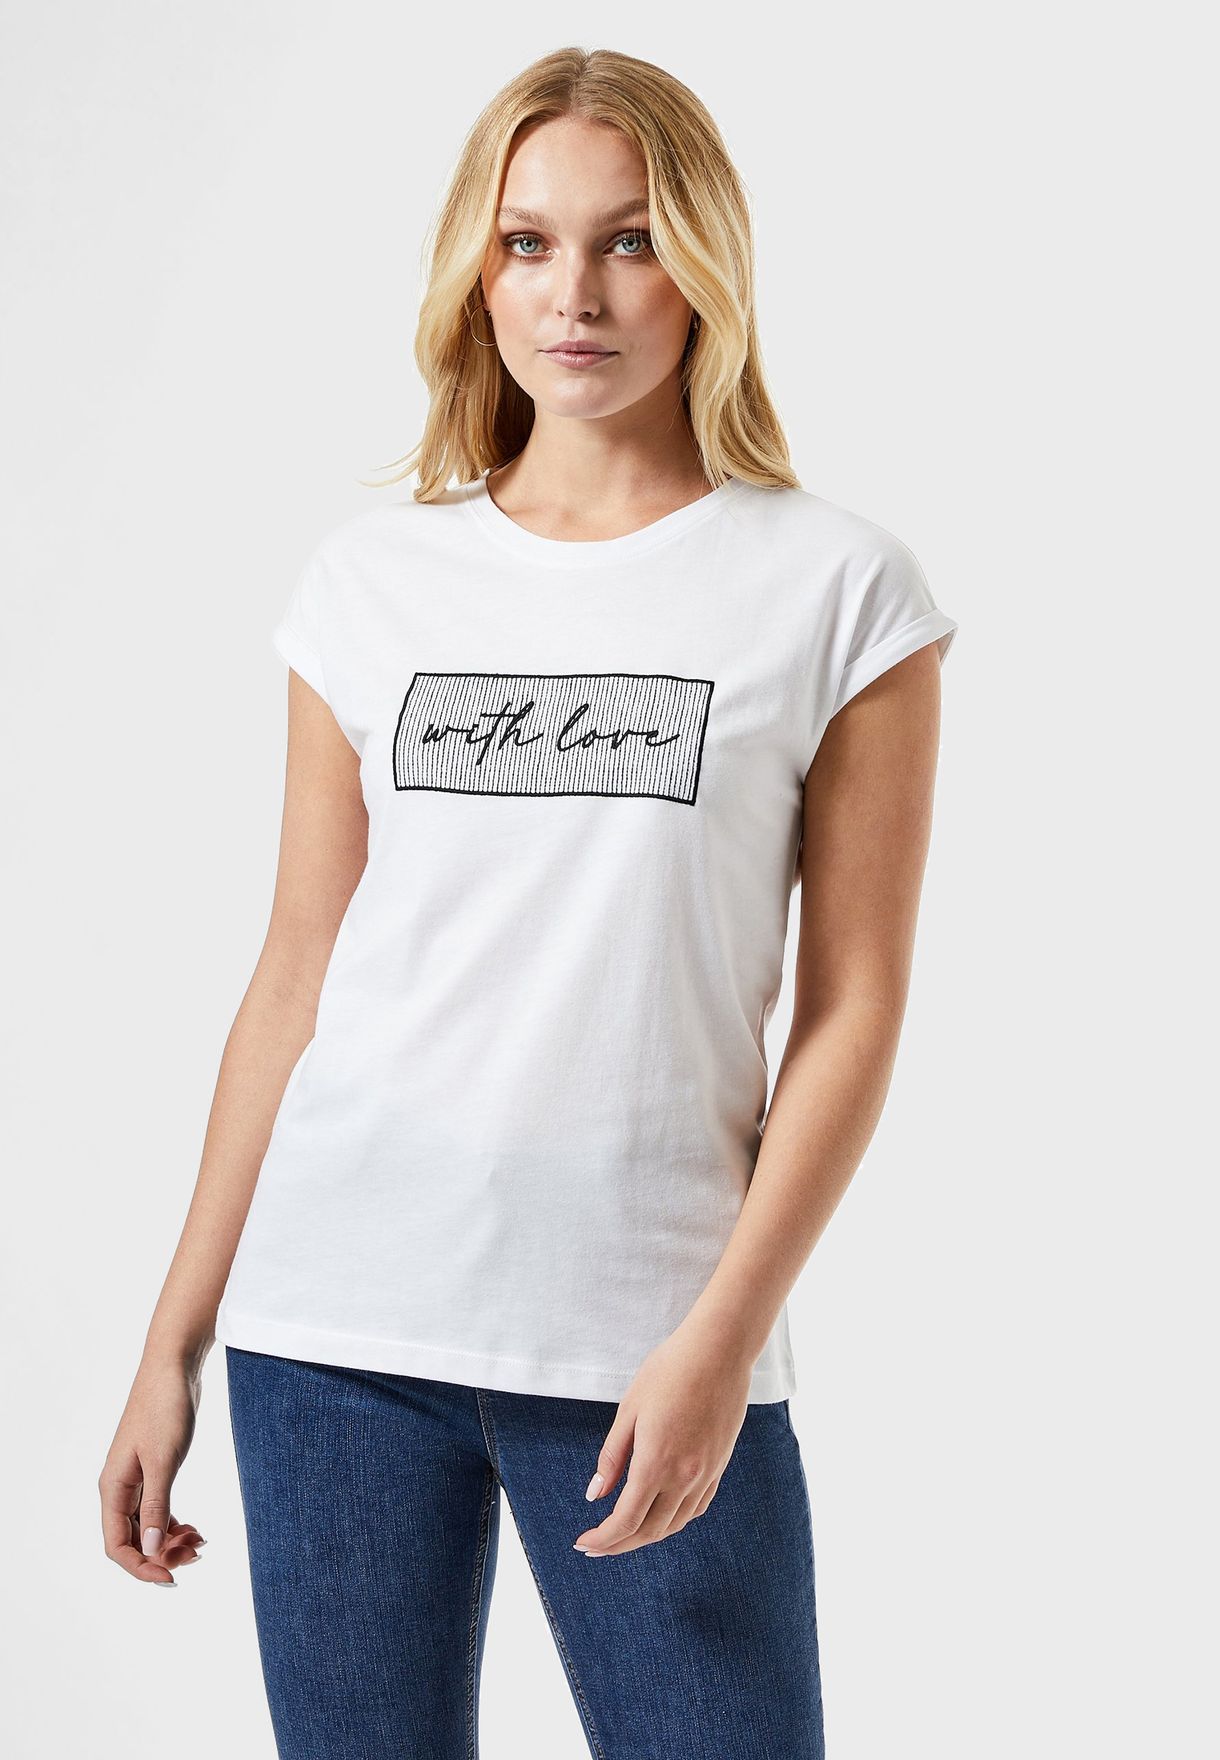 Dorothy Perkins T Shirts on Sale -